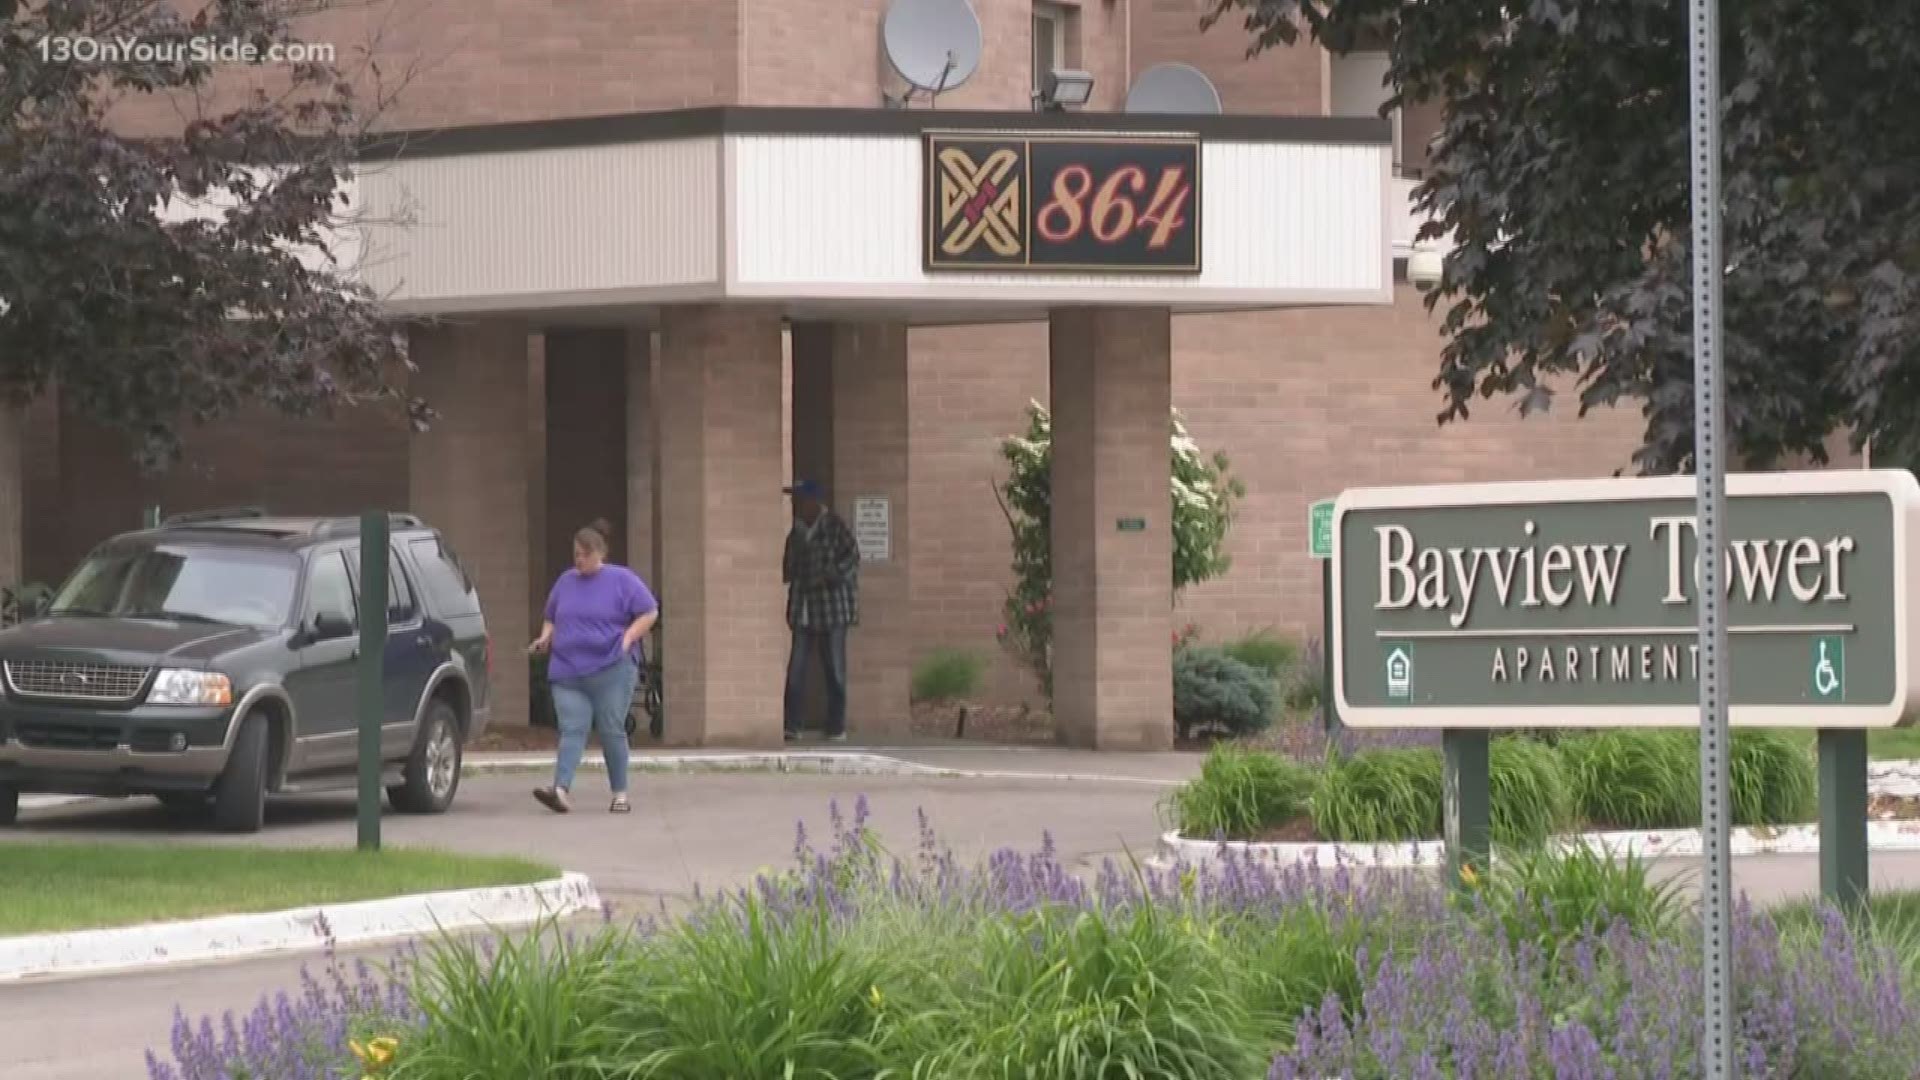 Muskegon Police arrested a 59-year-old woman in connection to a homicide at the Bayview Tower apartments. from over the weekend.